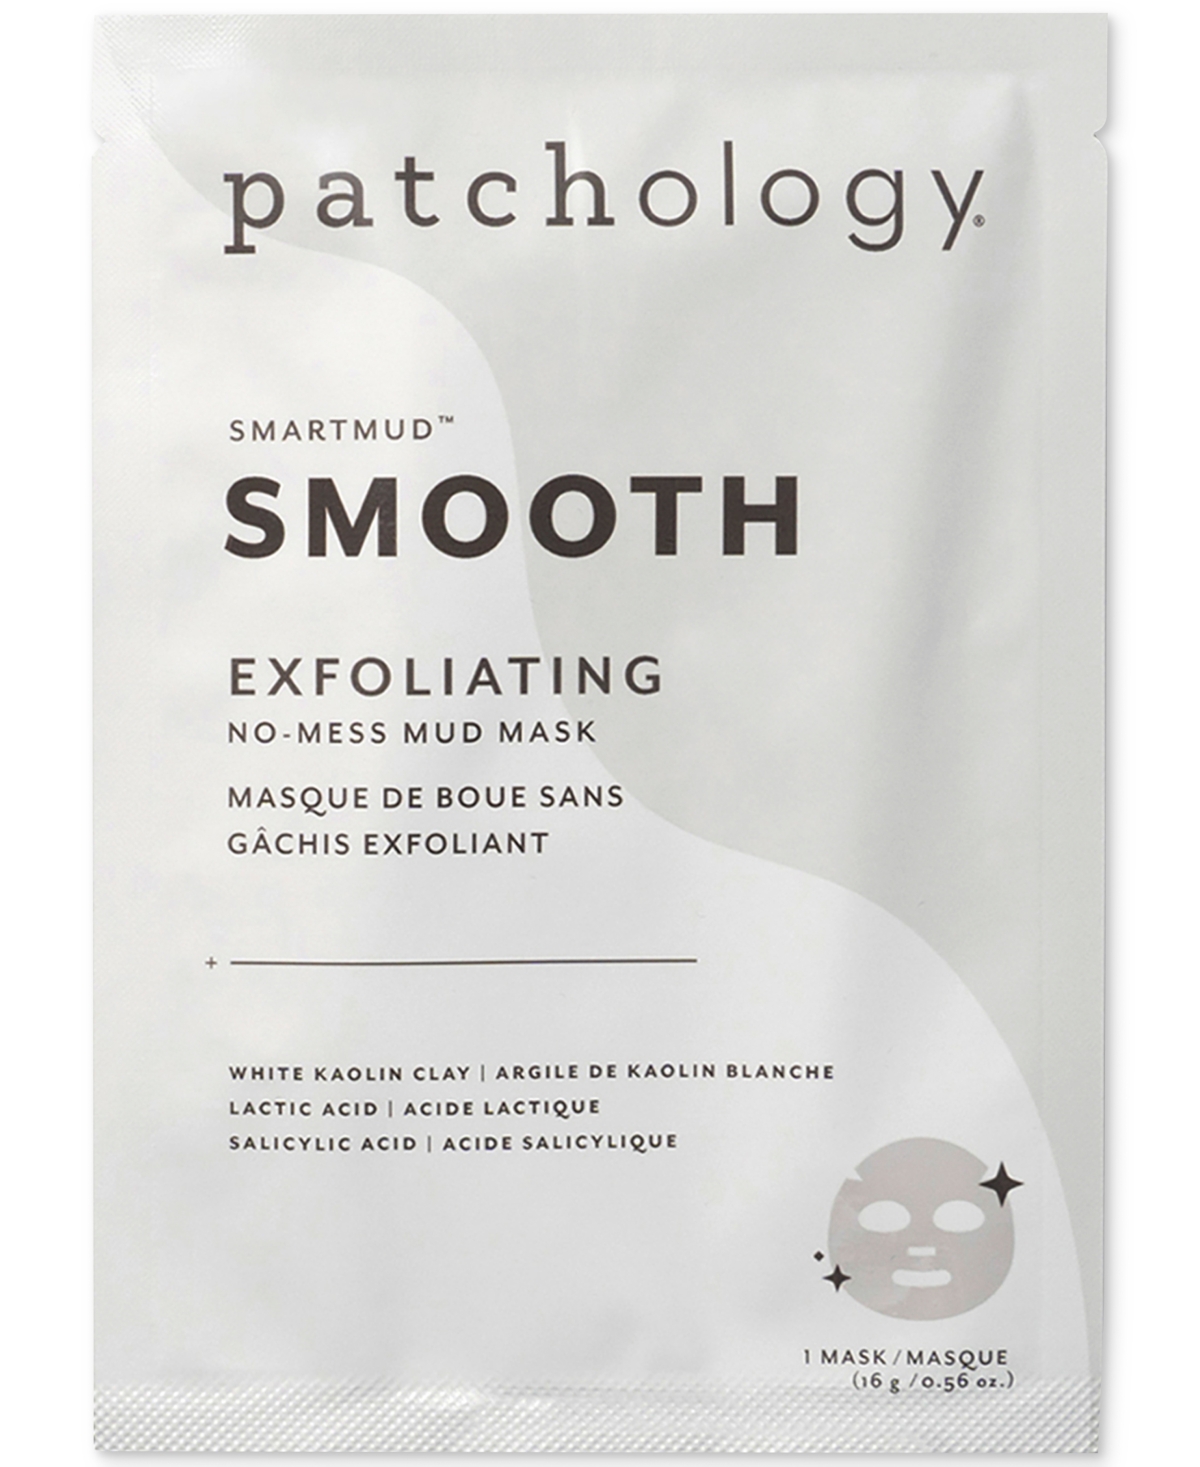 Patchology Smartmud Smooth No-mess Mud Mask In White